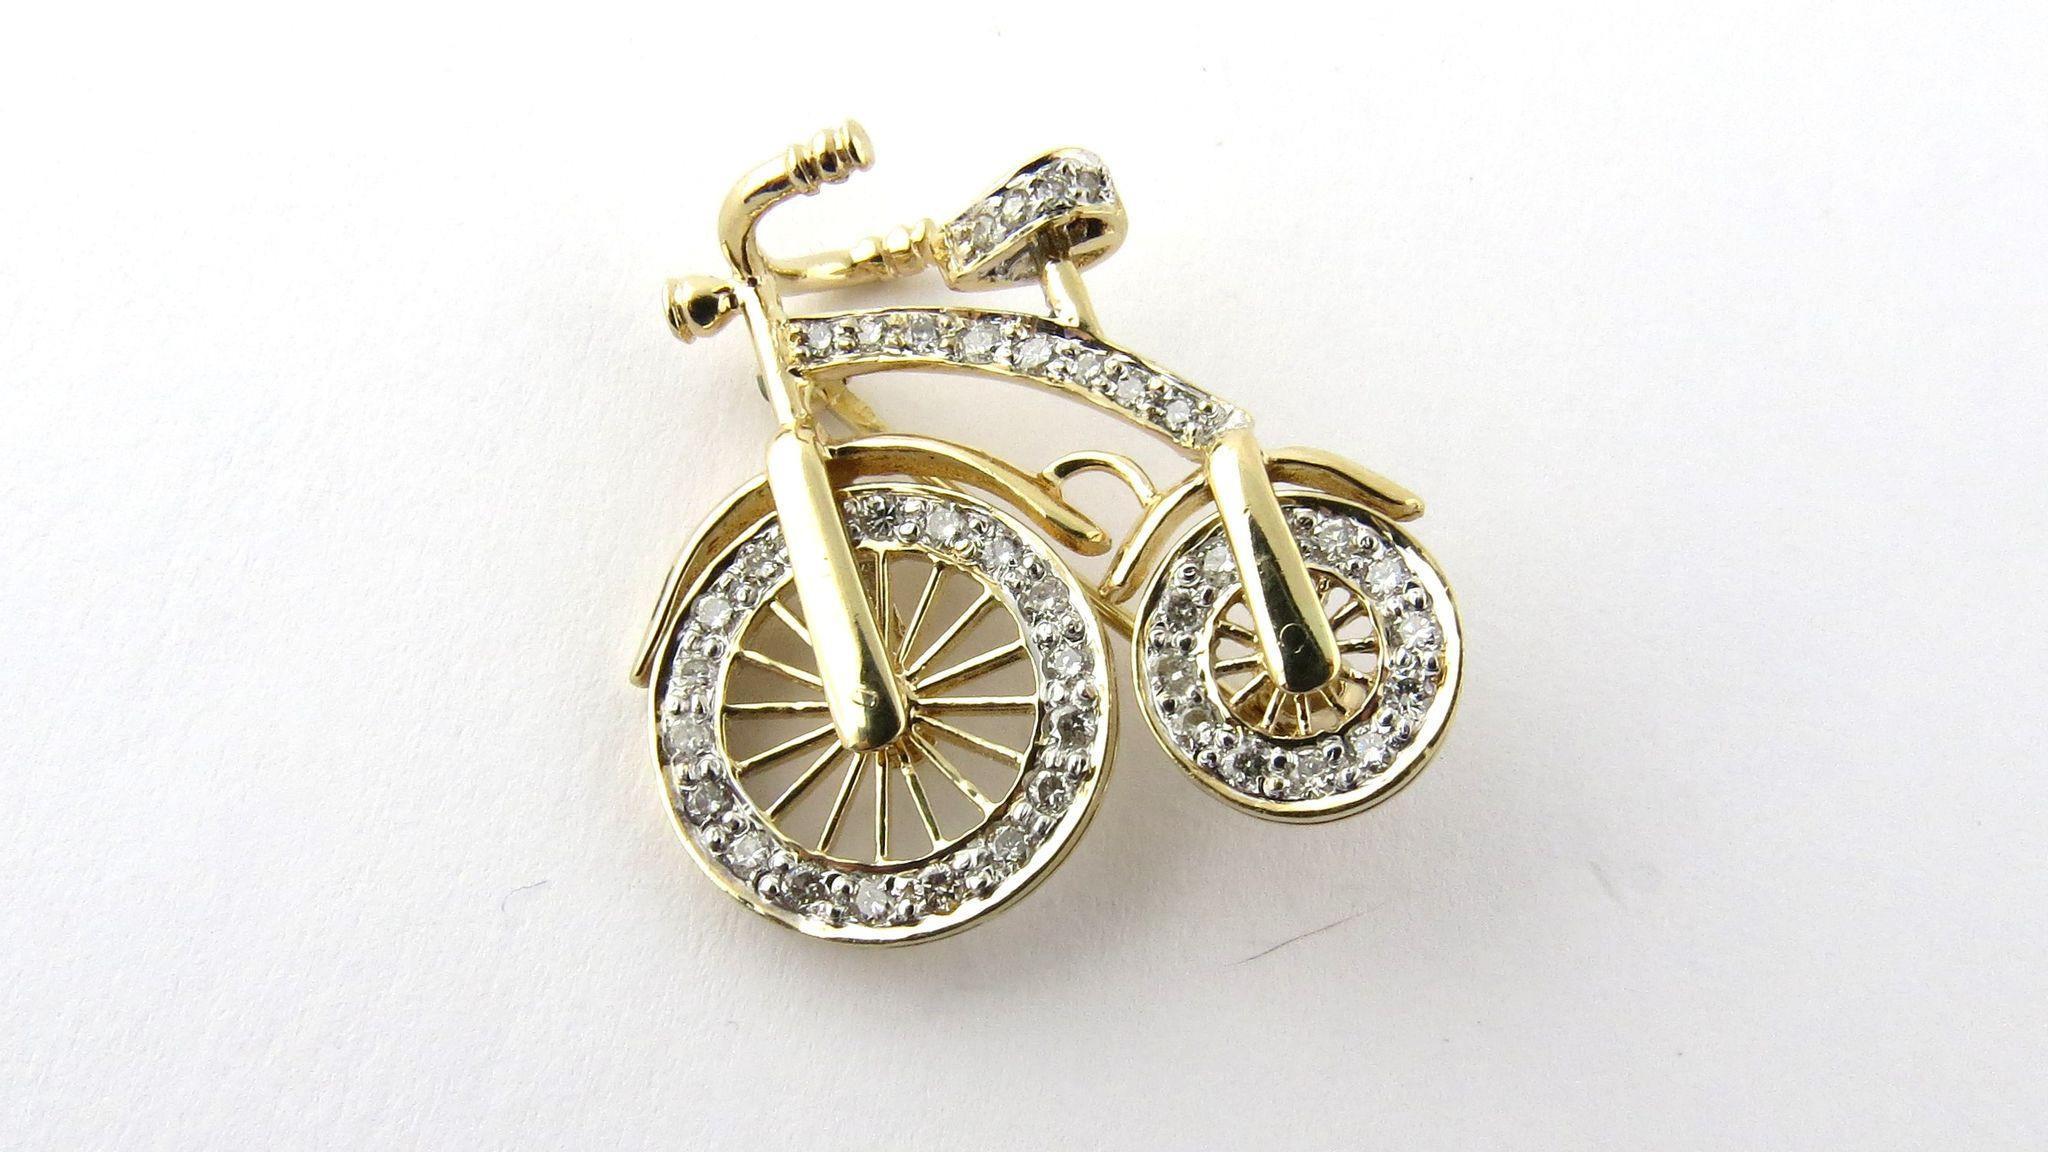 Vintage 14K Yellow Gold 3D Big Wheel Bicycle with Diamond Spinning Wheels 

23 mm x 25 mm 42 diamonds - approx 1 ct total diamond weight VS clarity diamonds -white with lots of sparkle 3.45 dwt 5.4 g 

Both wheels spin Beautiful well made piece